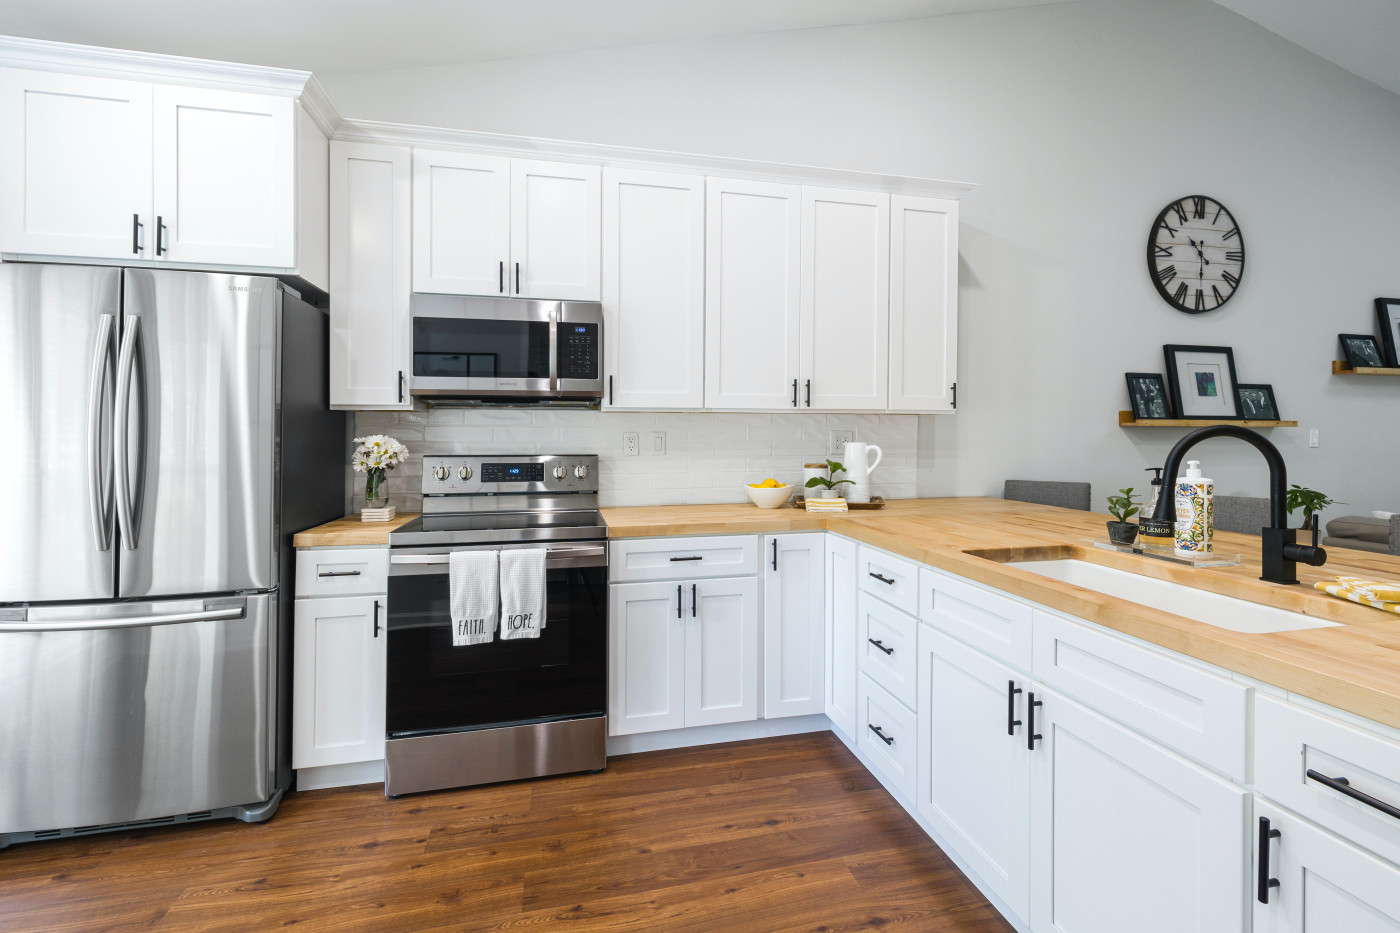 How Modular Kitchen Design Can Save You Money and Space